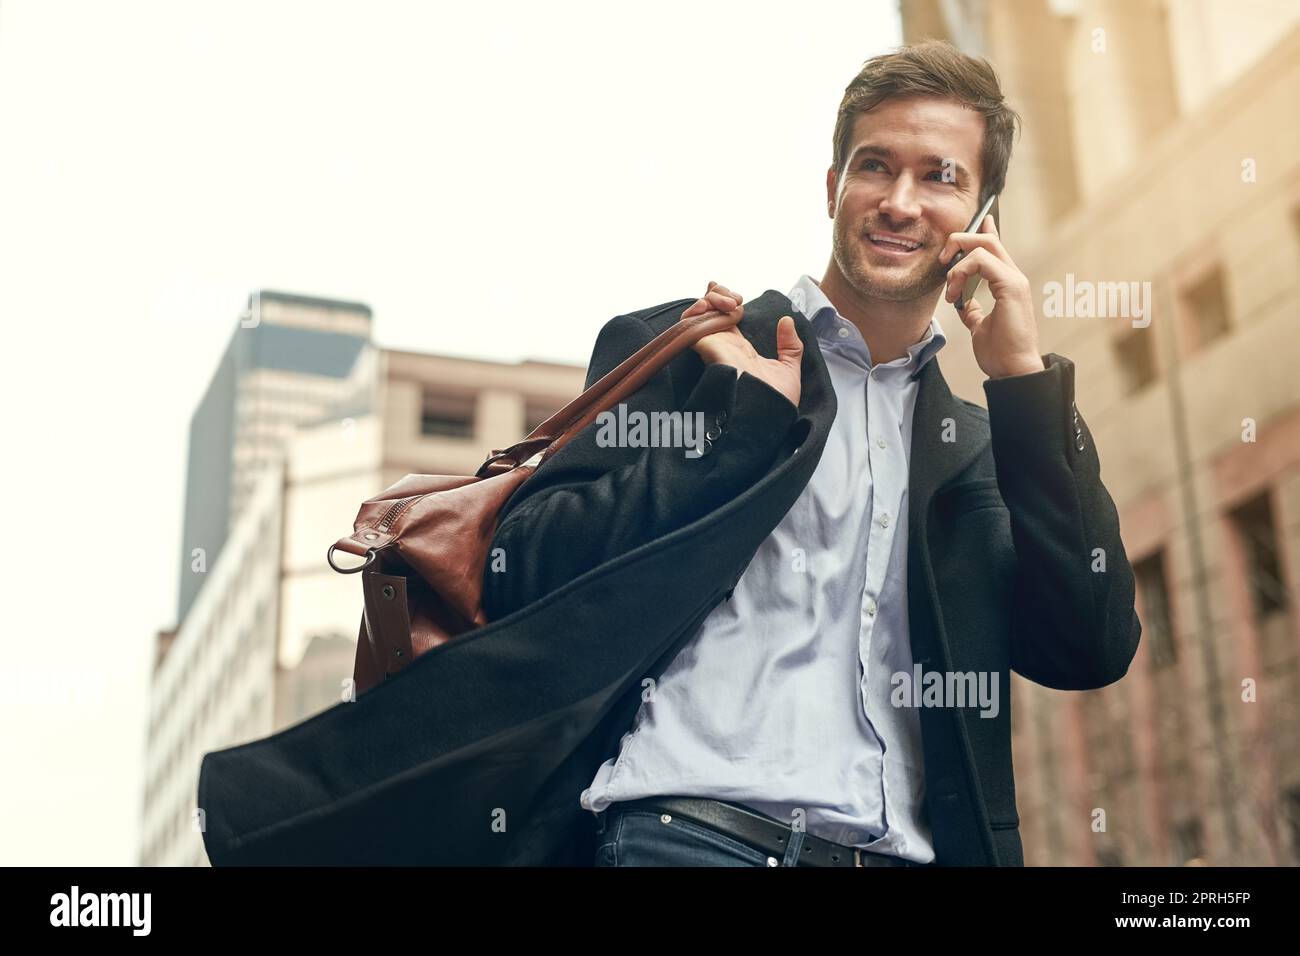 On his way to work. a handsome businessman on his morning commute. Stock Photo